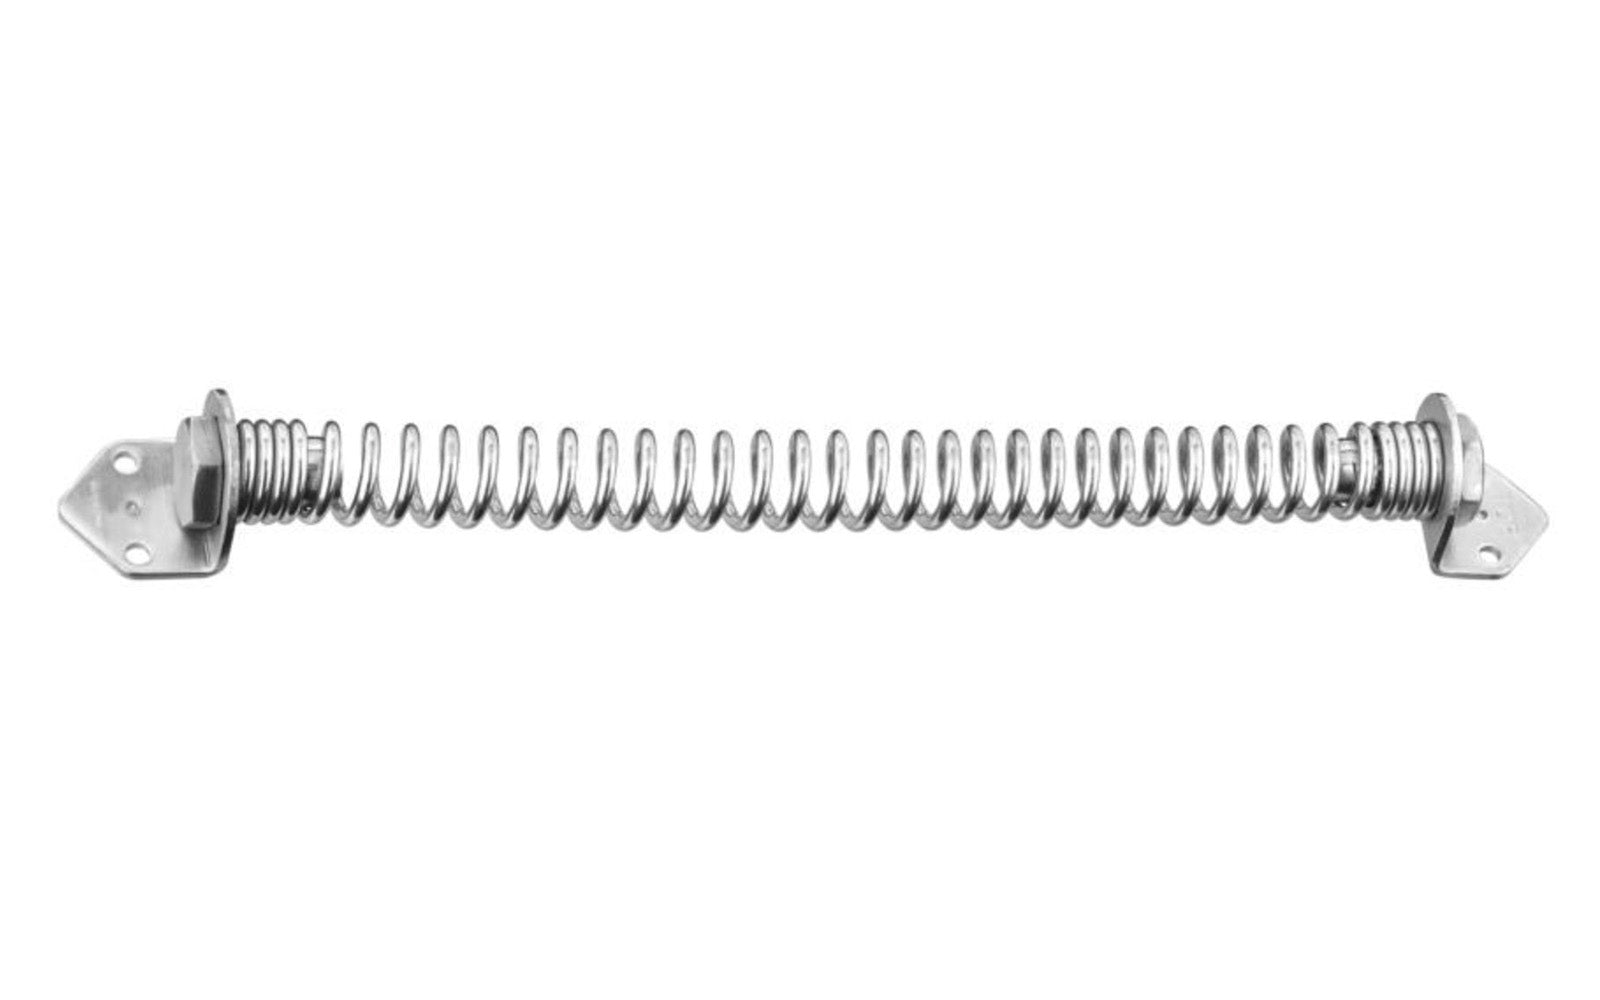 This door & gate spring is a self-closing spring designed to close doors & gates automatically. Closing tension is adjustable. Stainless steel for rust-resistant & ACQ safe - safe to use with premium woods including cedar & redwood. 14